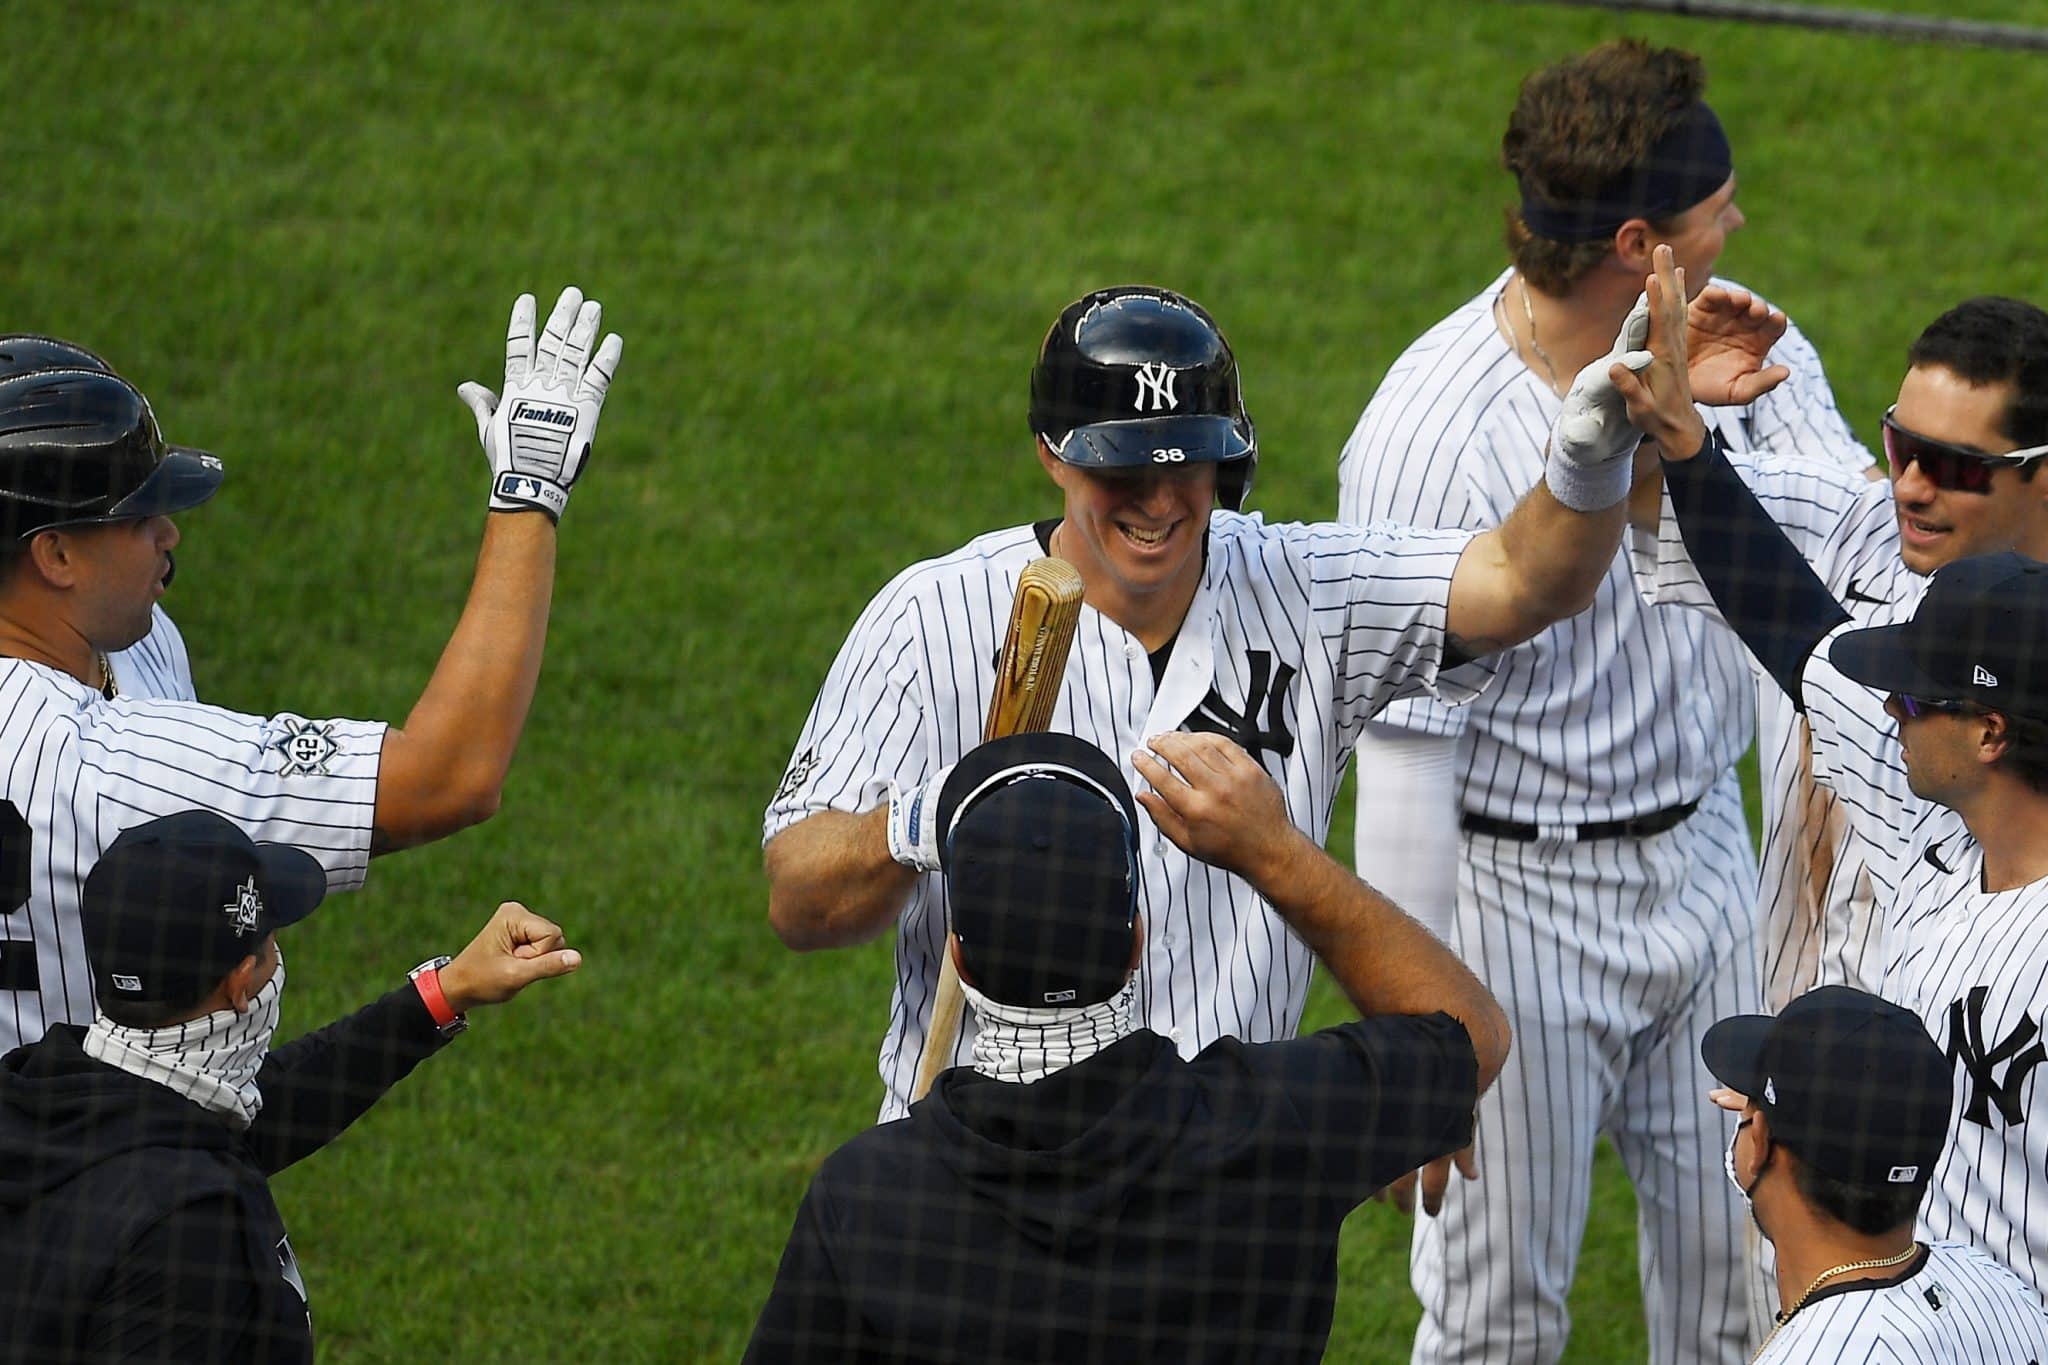 NEW YORK, NEW YORK - AUGUST 29: The New York Yankees high-five Erik Kratz #42 (C) after his at-bat where he attempted to bunt, allowing teammate Clint Frazier #42 (not pictured) to score on a wild pitch during the ninth inning against the New York Mets at Yankee Stadium on August 29, 2020 in the Bronx borough of New York City. The Yankees won 2-1. All players are wearing #42 in honor of Jackie Robinson Day. The day honoring Jackie Robinson, traditionally held on April 15, was rescheduled due to the COVID-19 pandemic.